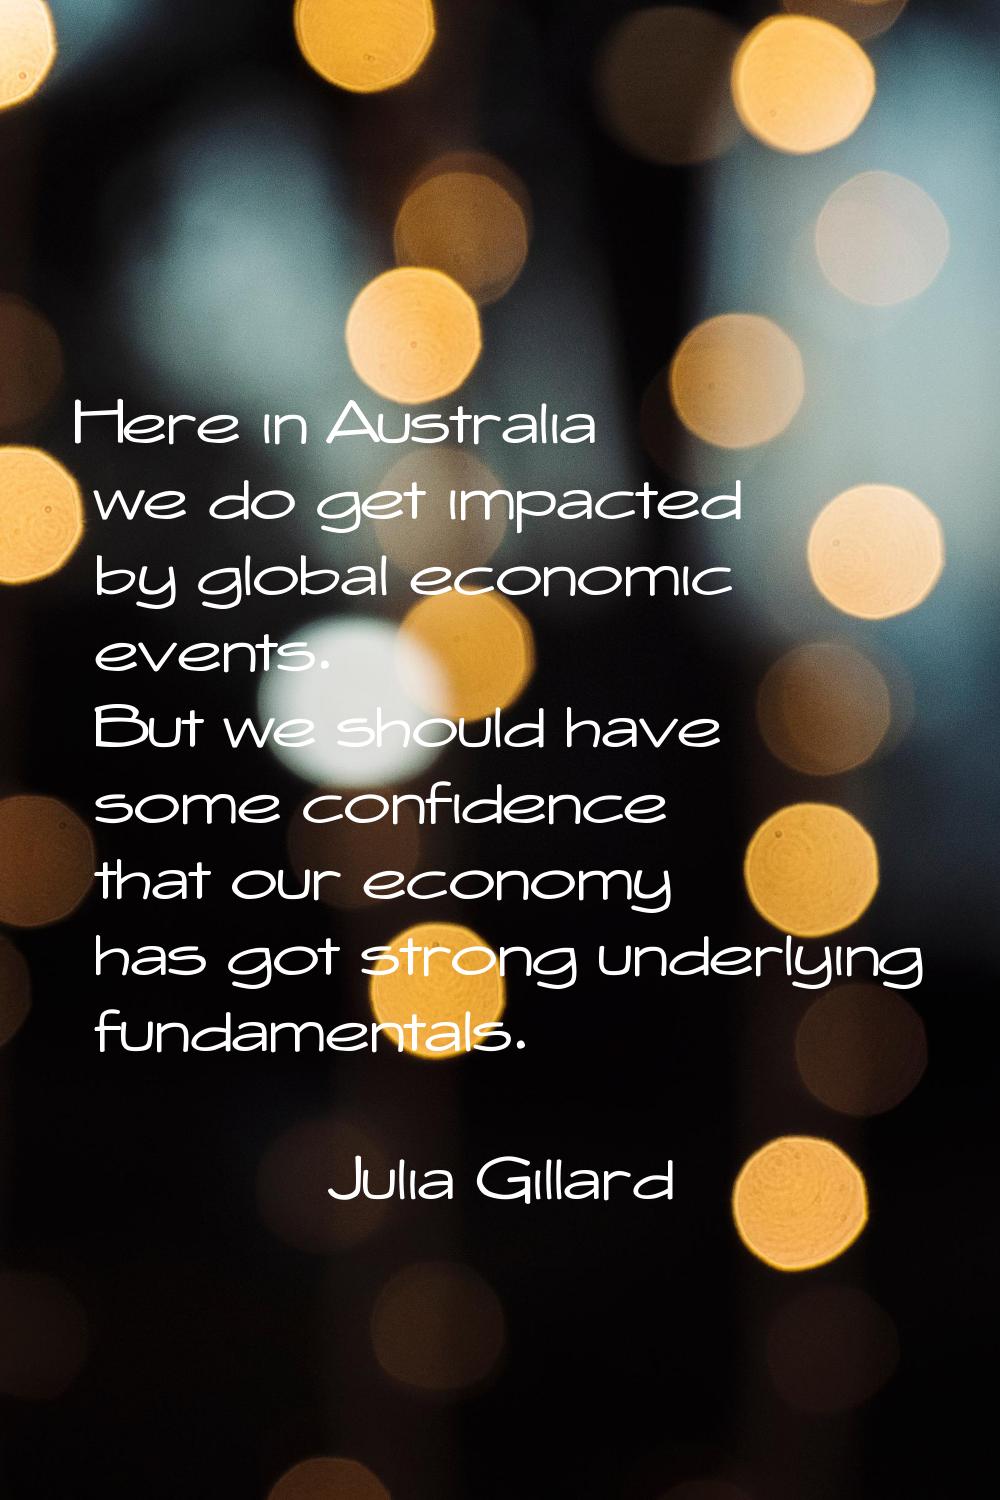 Here in Australia we do get impacted by global economic events. But we should have some confidence 